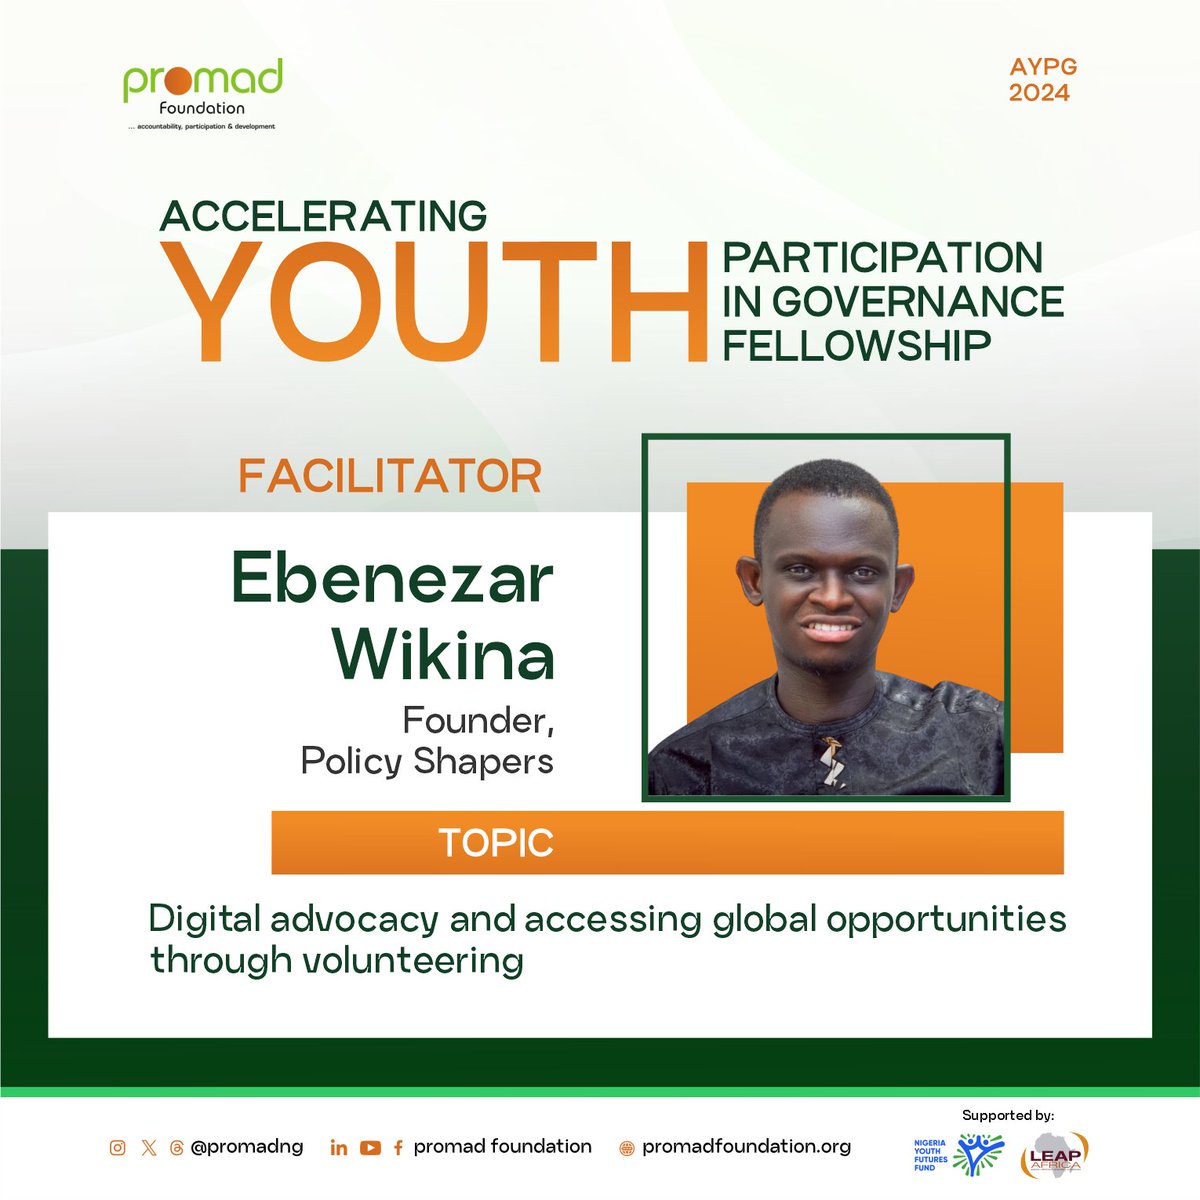 Earlier today, Mr @EbenezarWikina delivered his last session with the participants of our #AYPGFellowship supported by @ng_youthfund During the session titled: 'Digital Advocacy and Accessing Global Opportunities through Volunteering', Ebenezar introduced the participants to…